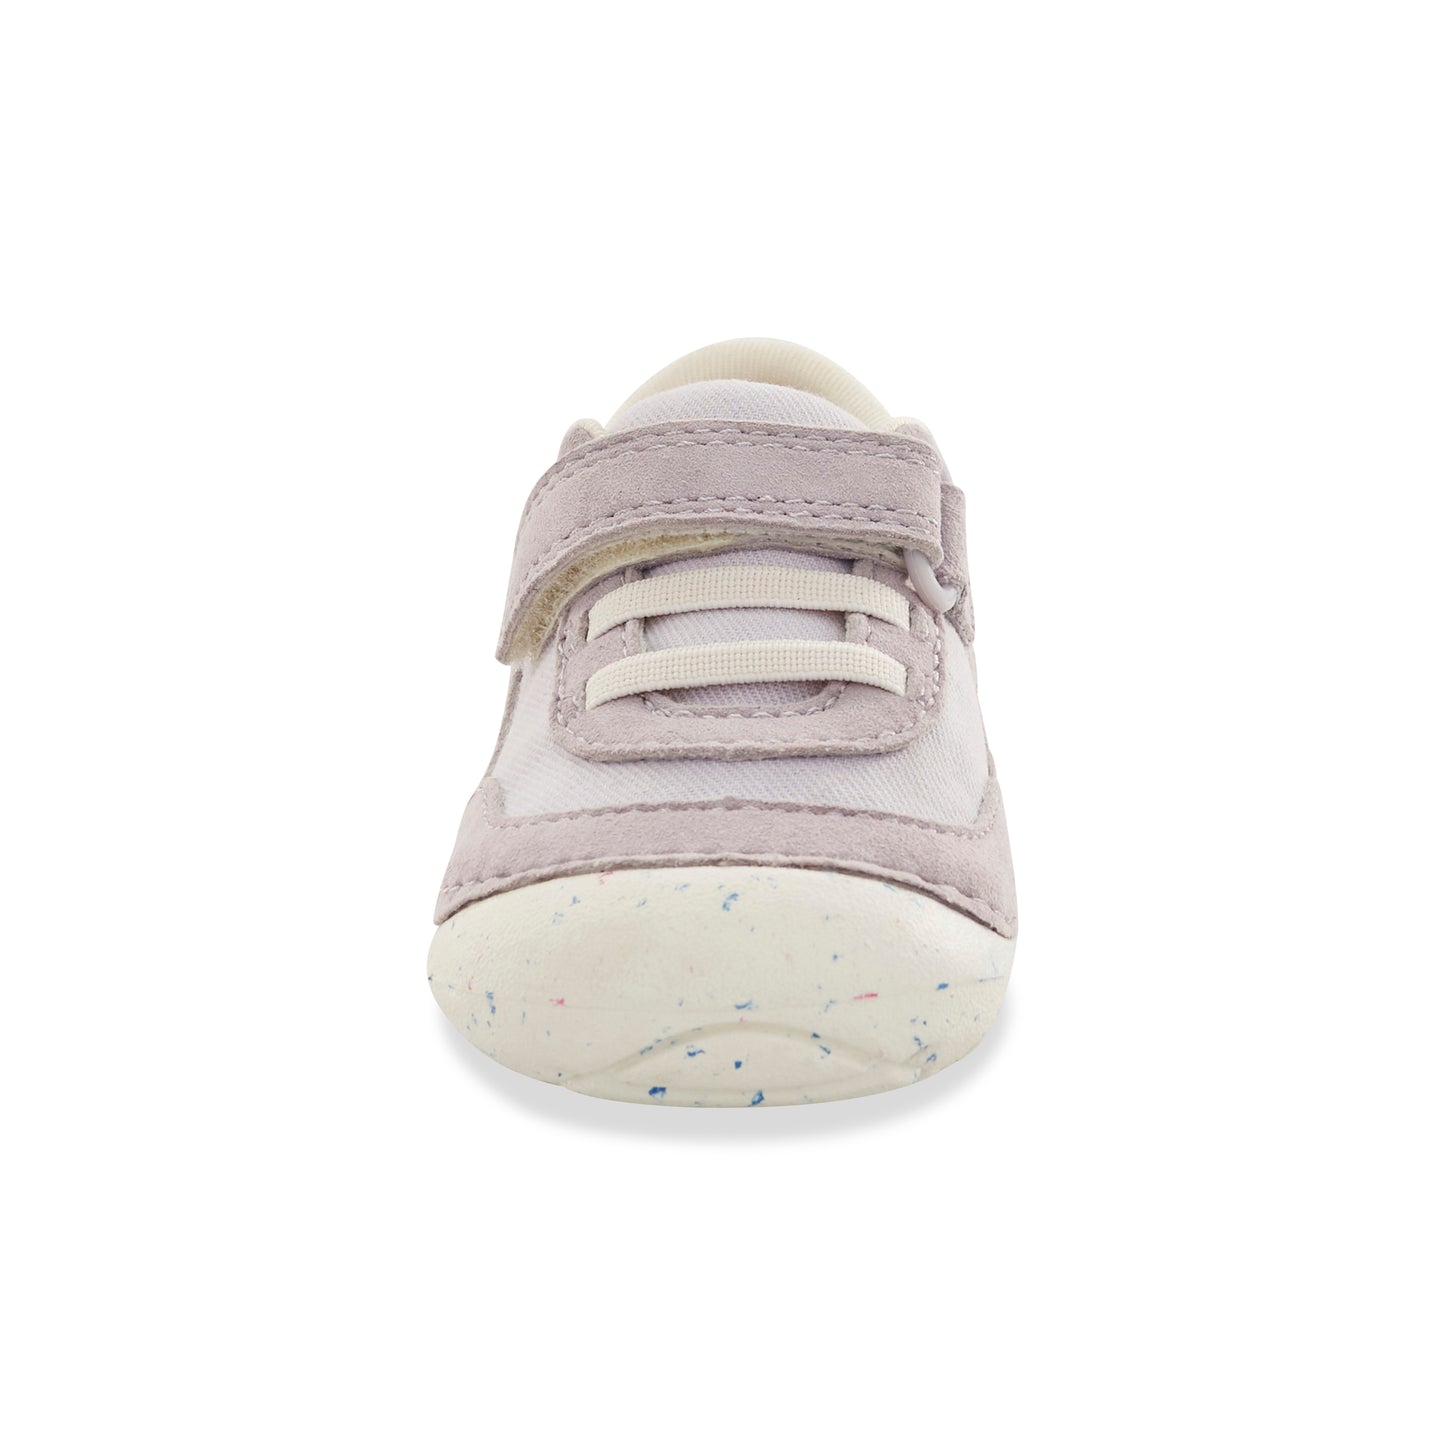 soft-motion-sprout-sneaker-littlekid-lilac__Lilac_4